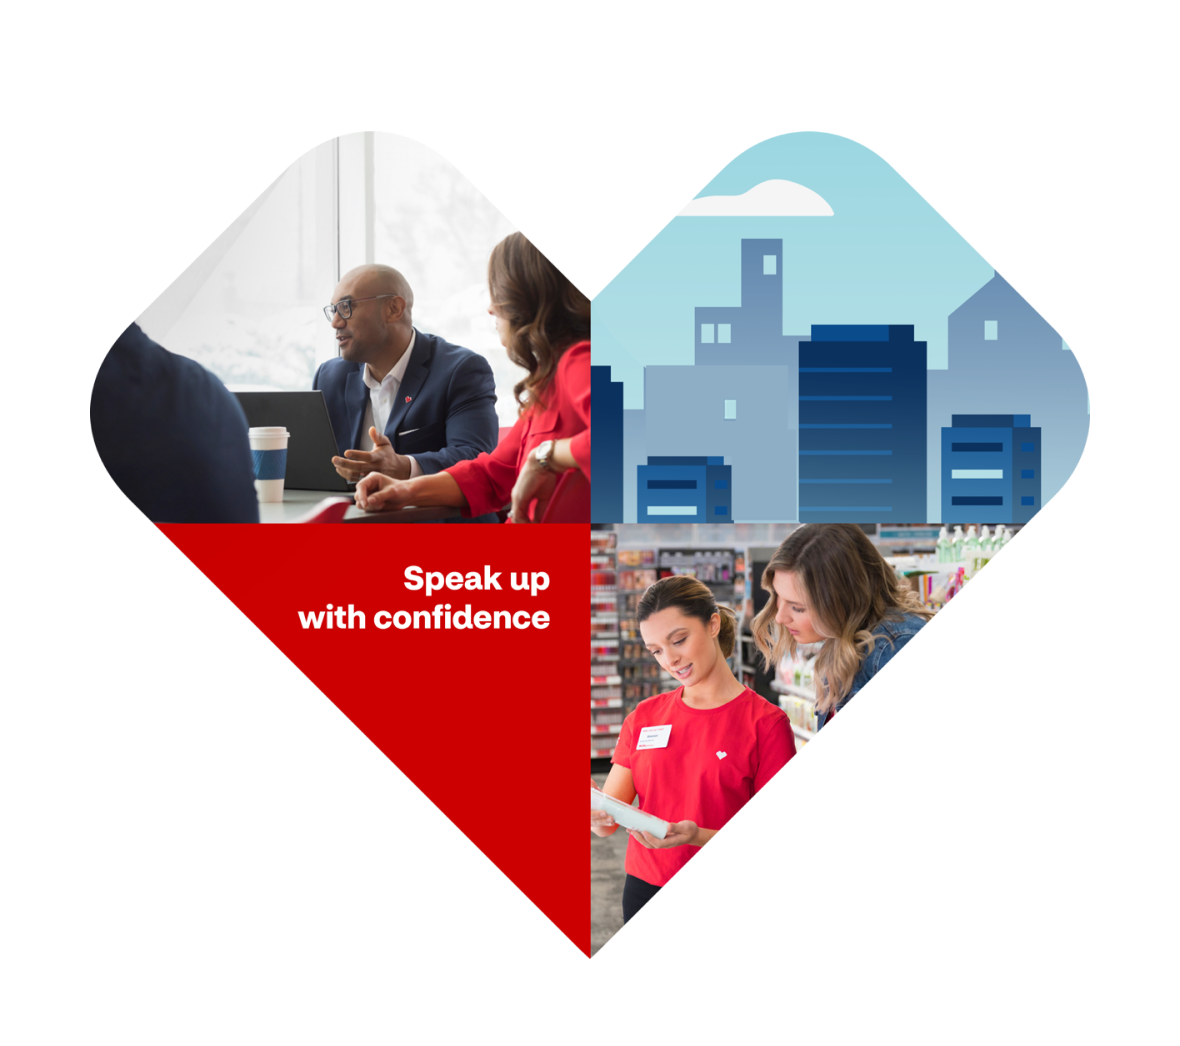 A heart with four quadrants. A man and a woman in a corporate meeting. An illustration of a city skyline. A CVS retail employee helping a customer. Text that reads Speak up with confidence